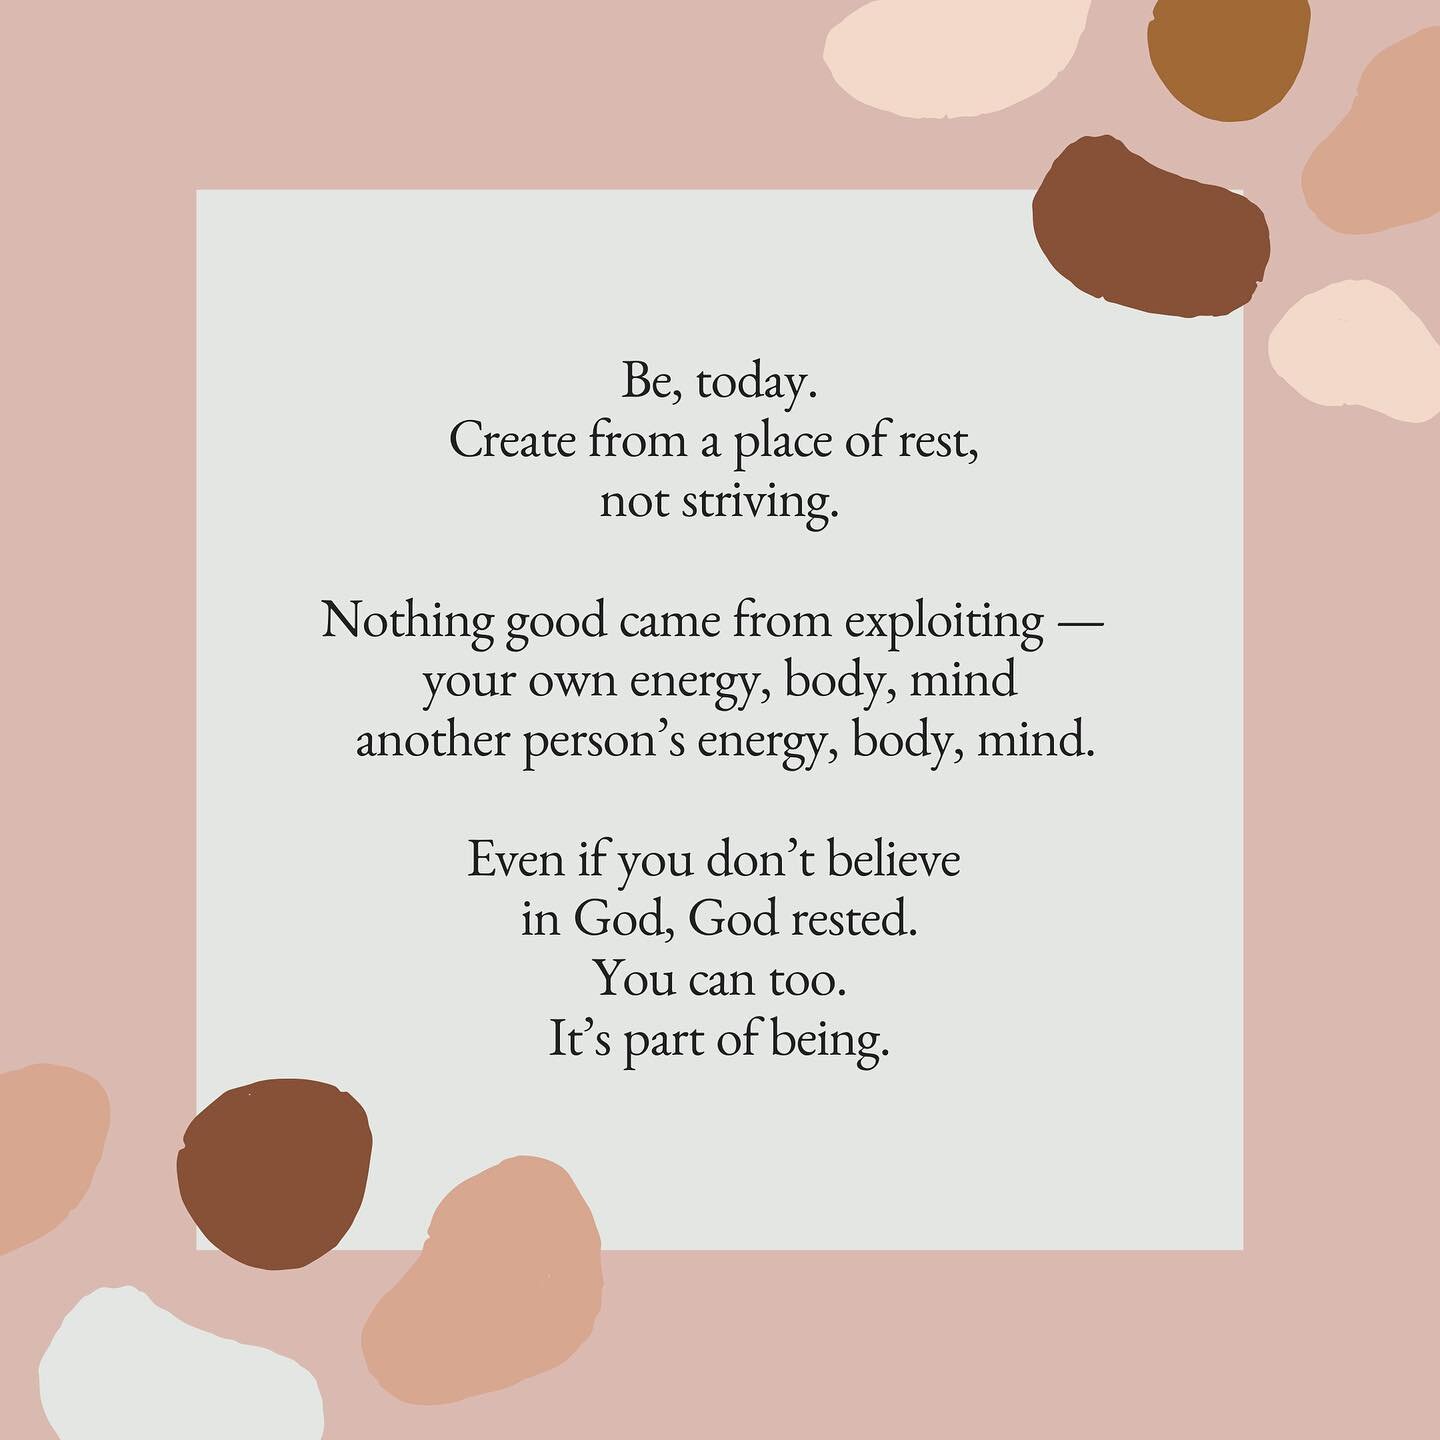 A gentle reminder to simply: be. Share this message with a friend if it resonates with you👇🏽 ✨🥰

You are not a burden.
Your rest is not a burden.
Your rest is delight.
Your rest is needed because &mdash;
Your soul is needed, and
Your presence is n